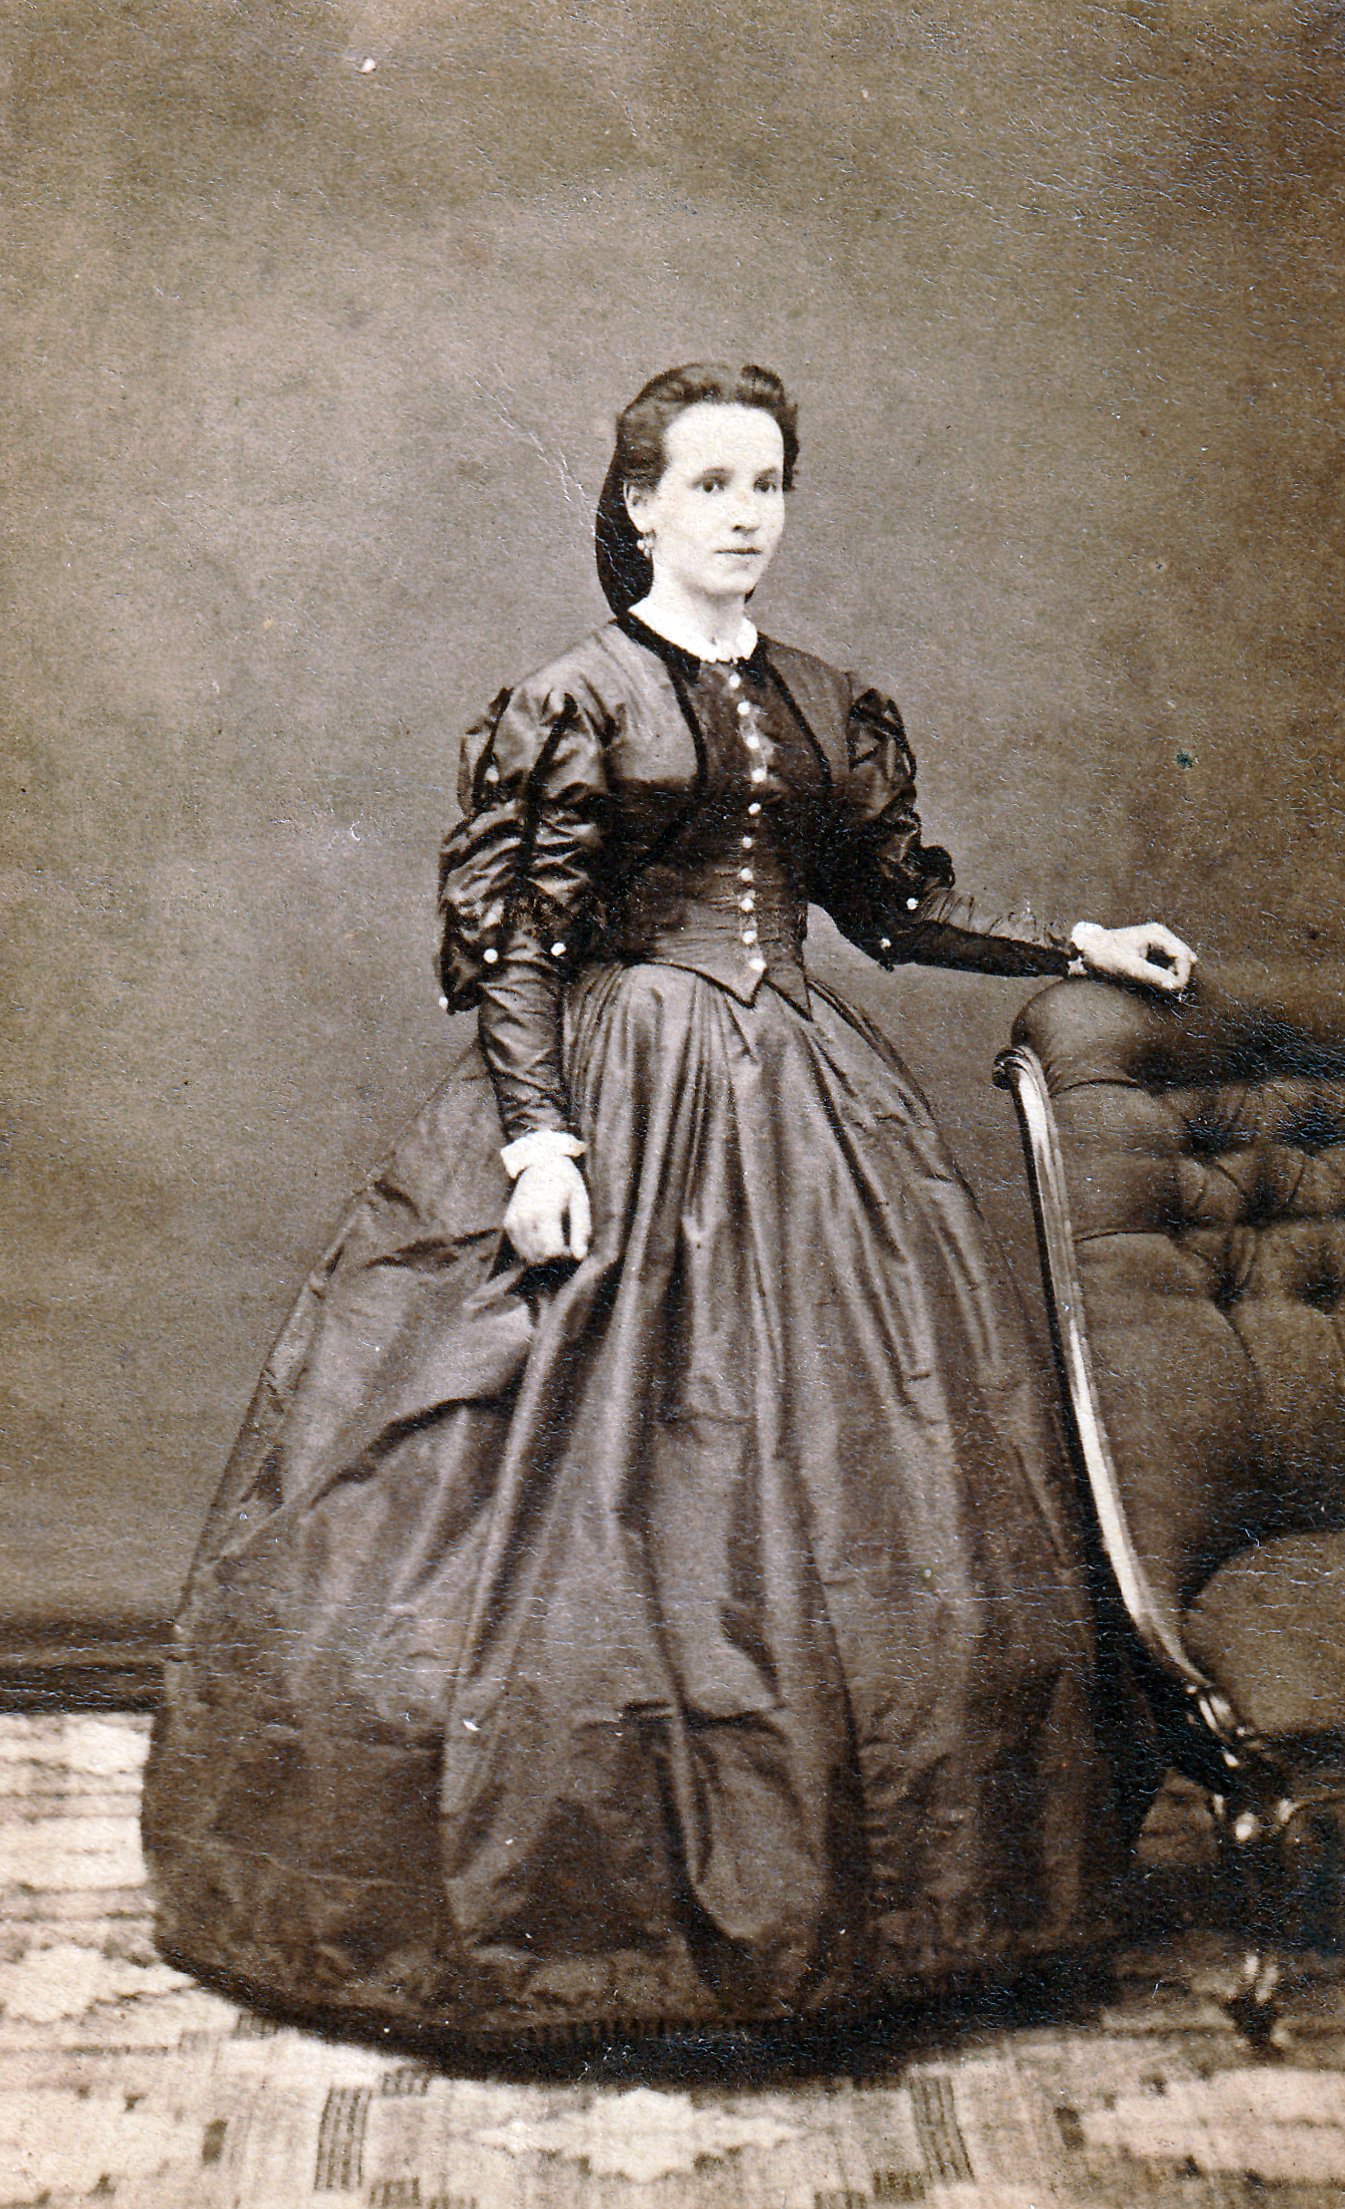 Studio portrait of a woman in dark dress with white buttons down the front. her right hand is resting on a dark chair